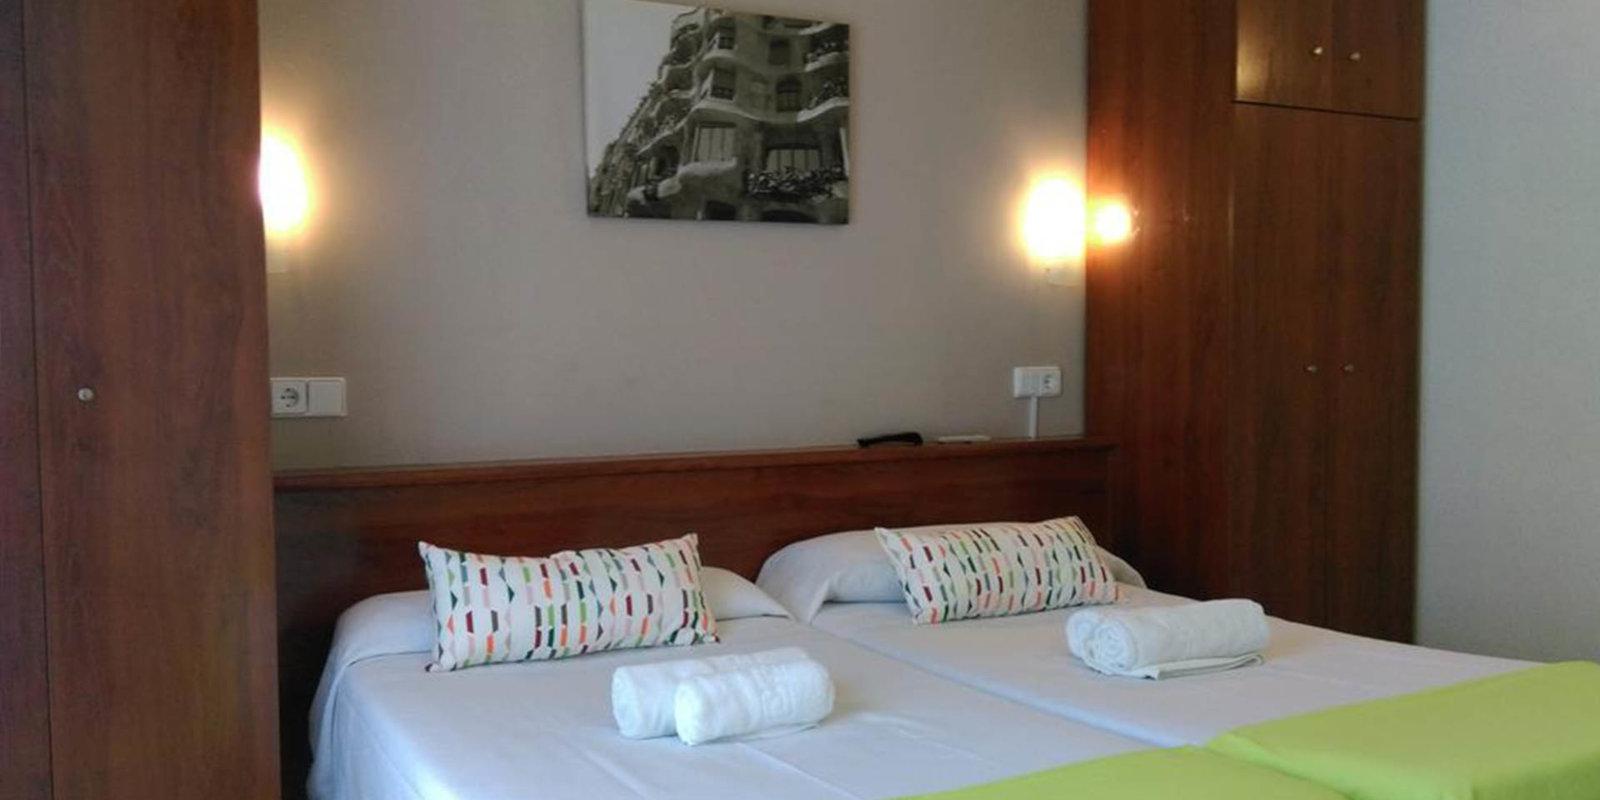 Hostal Termes is an excellent budget friendly choice of accommodation for gay travellers to Sitges who don't want to sleep in dorms.